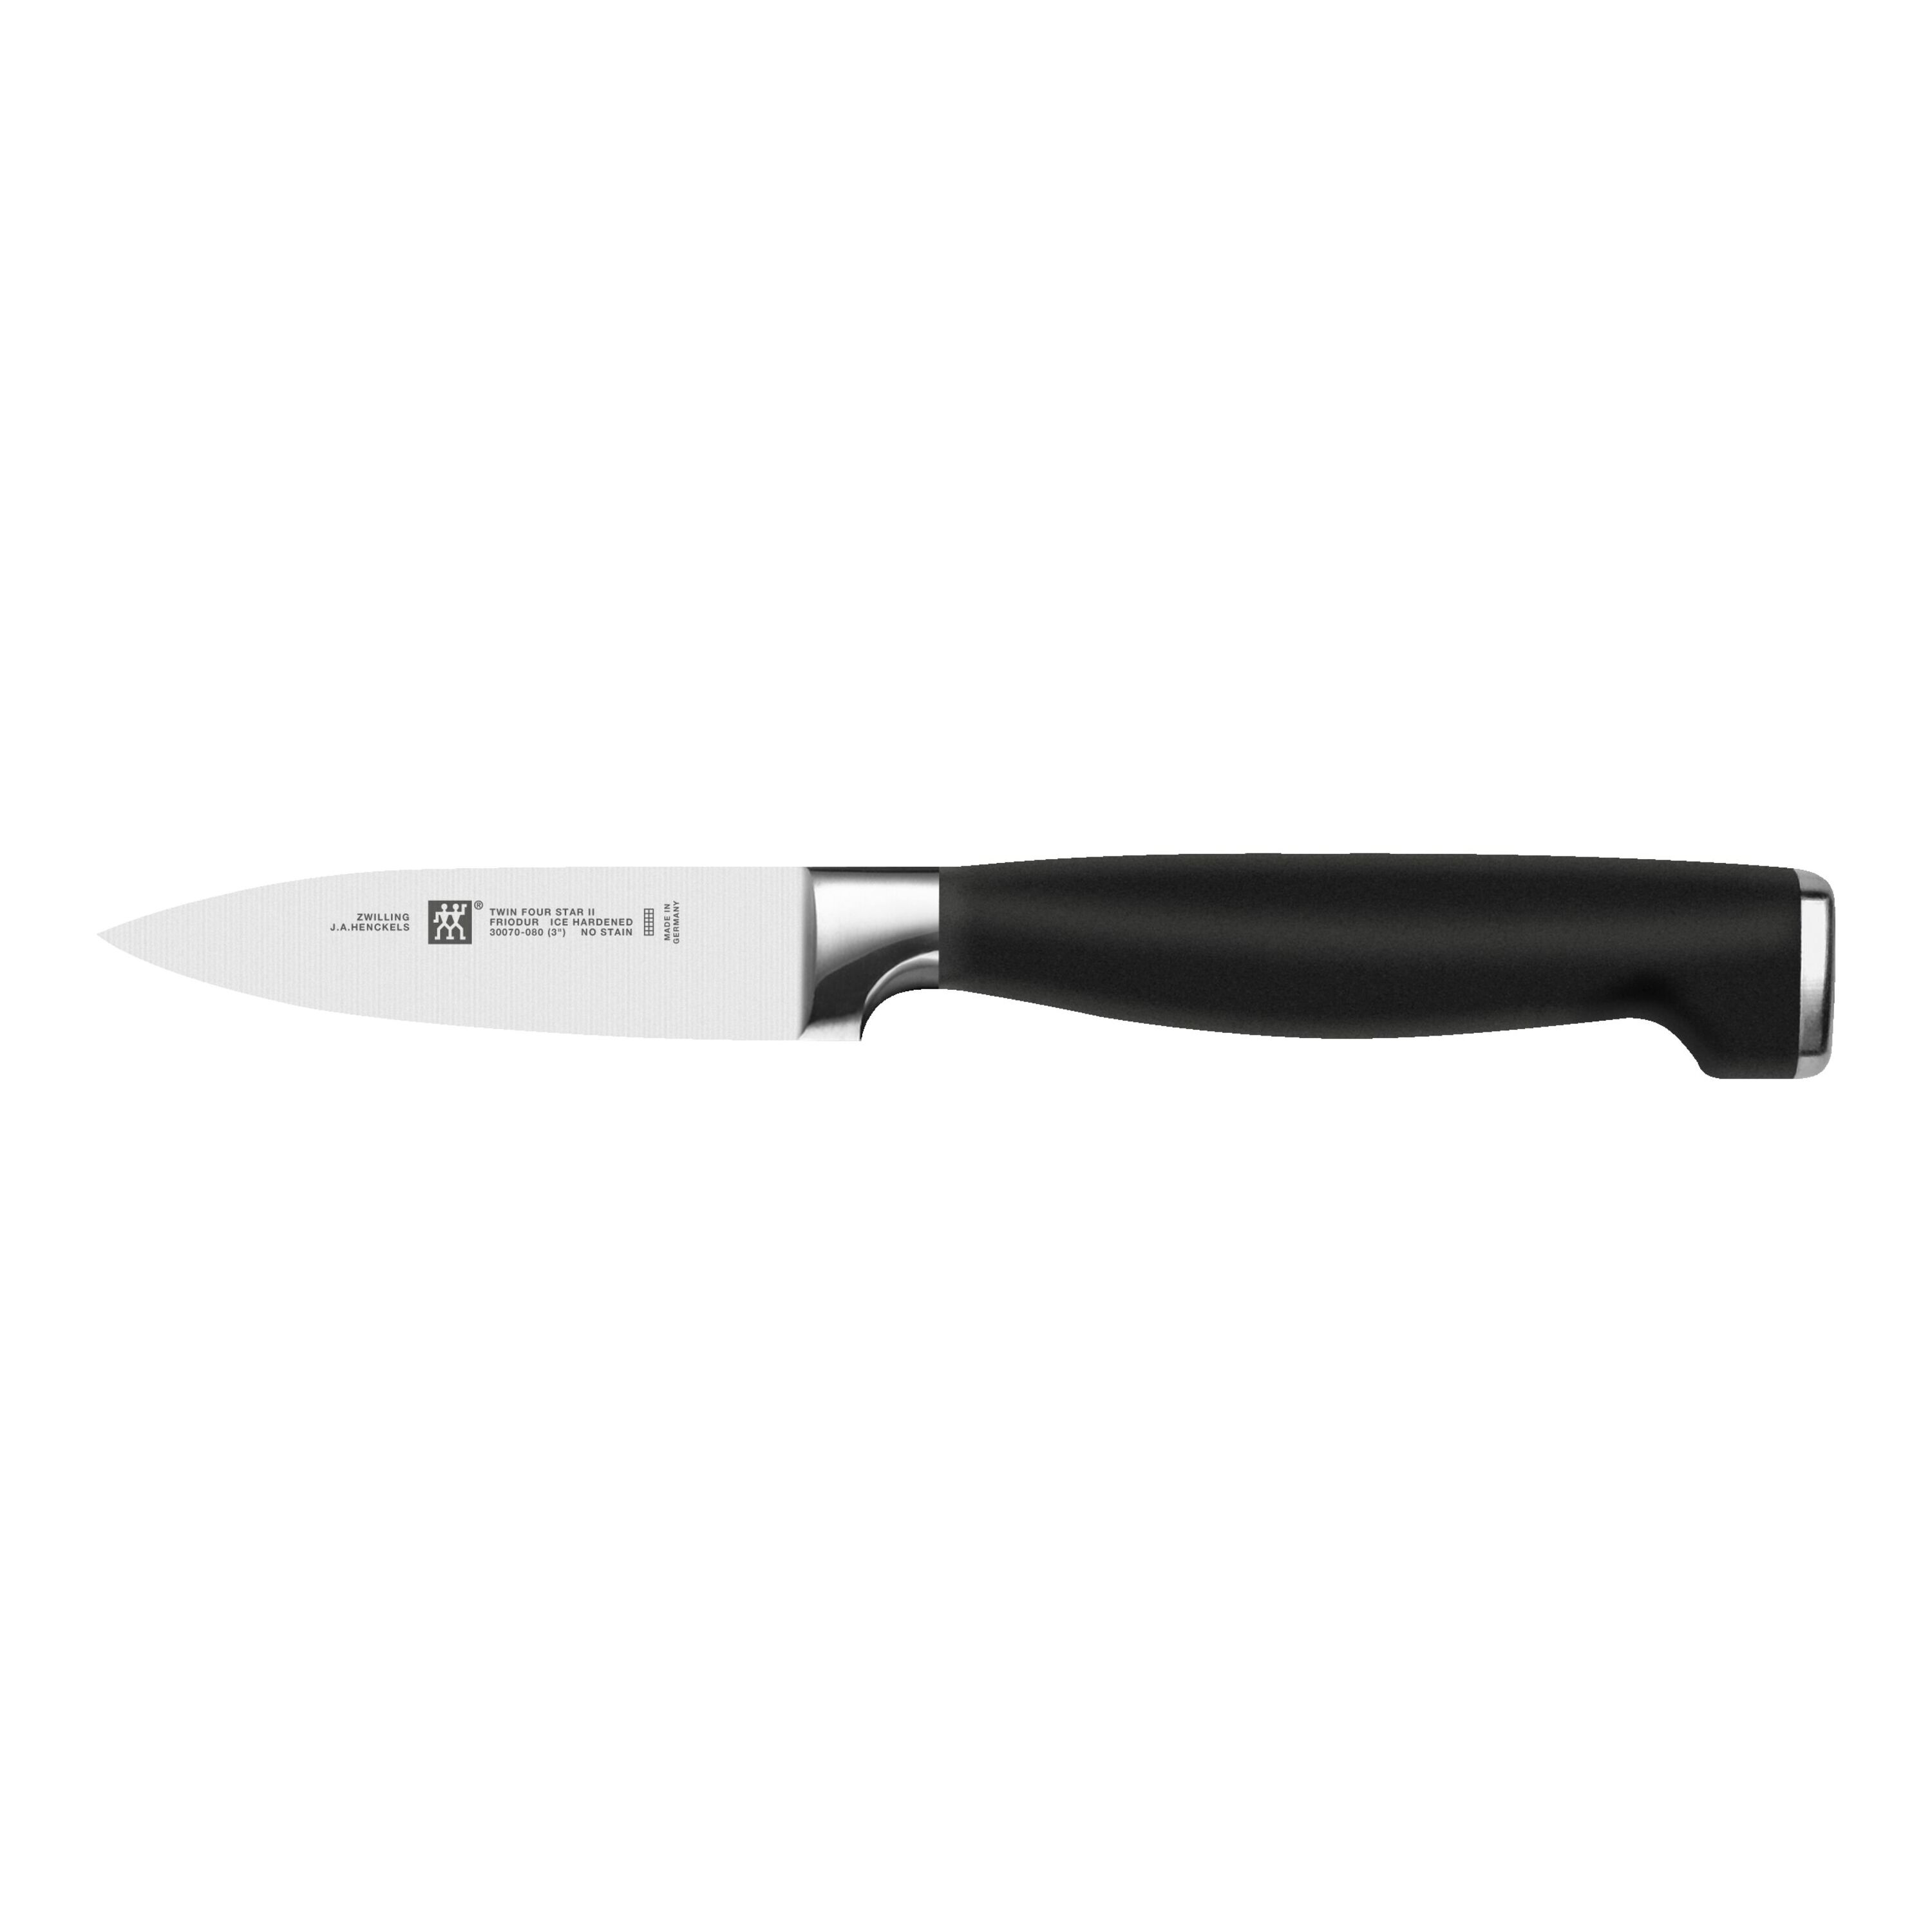 https://www.zwilling.com/on/demandware.static/-/Sites-zwilling-master-catalog/default/dw7f2be51a/images/large/30070-080-0_2.jpg